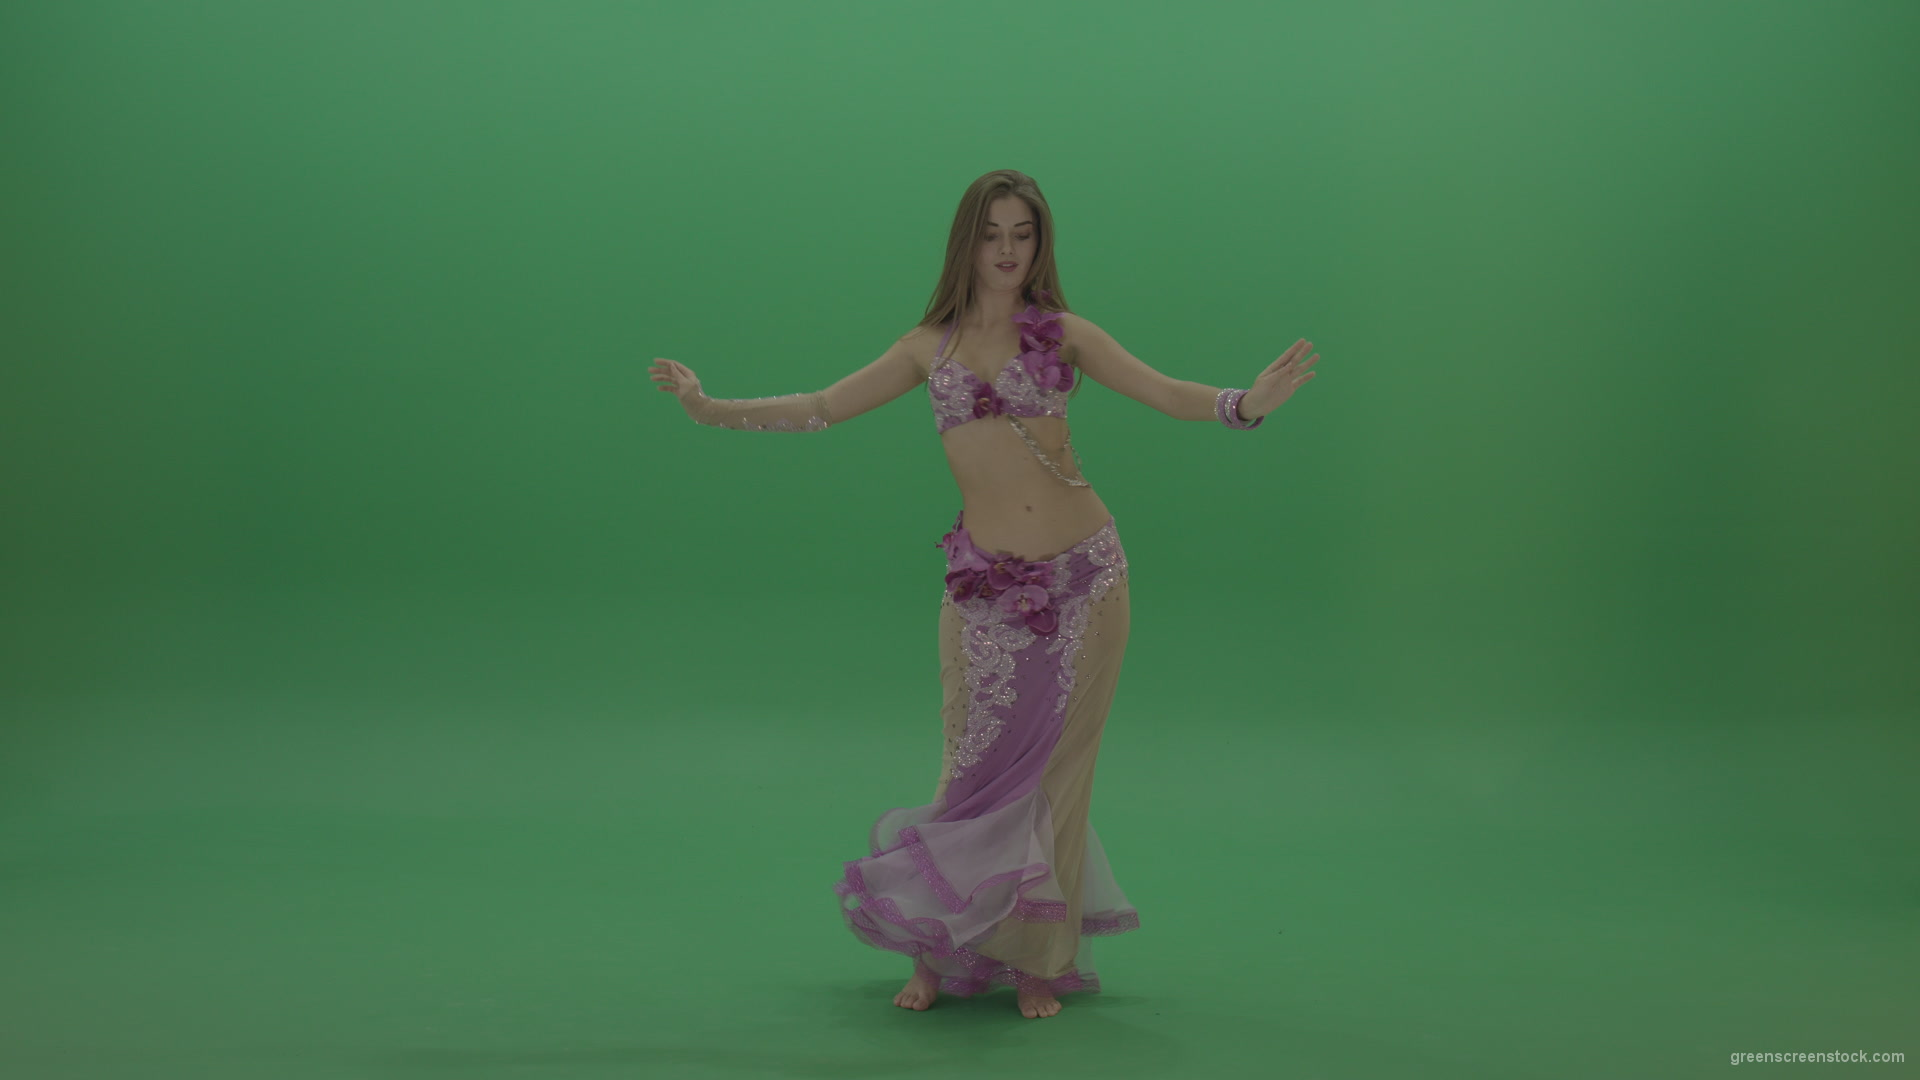 Delightful-belly-dancer-in-pink-wear-display-amazing-dance-moves-over-chromakey-background_006 Green Screen Stock